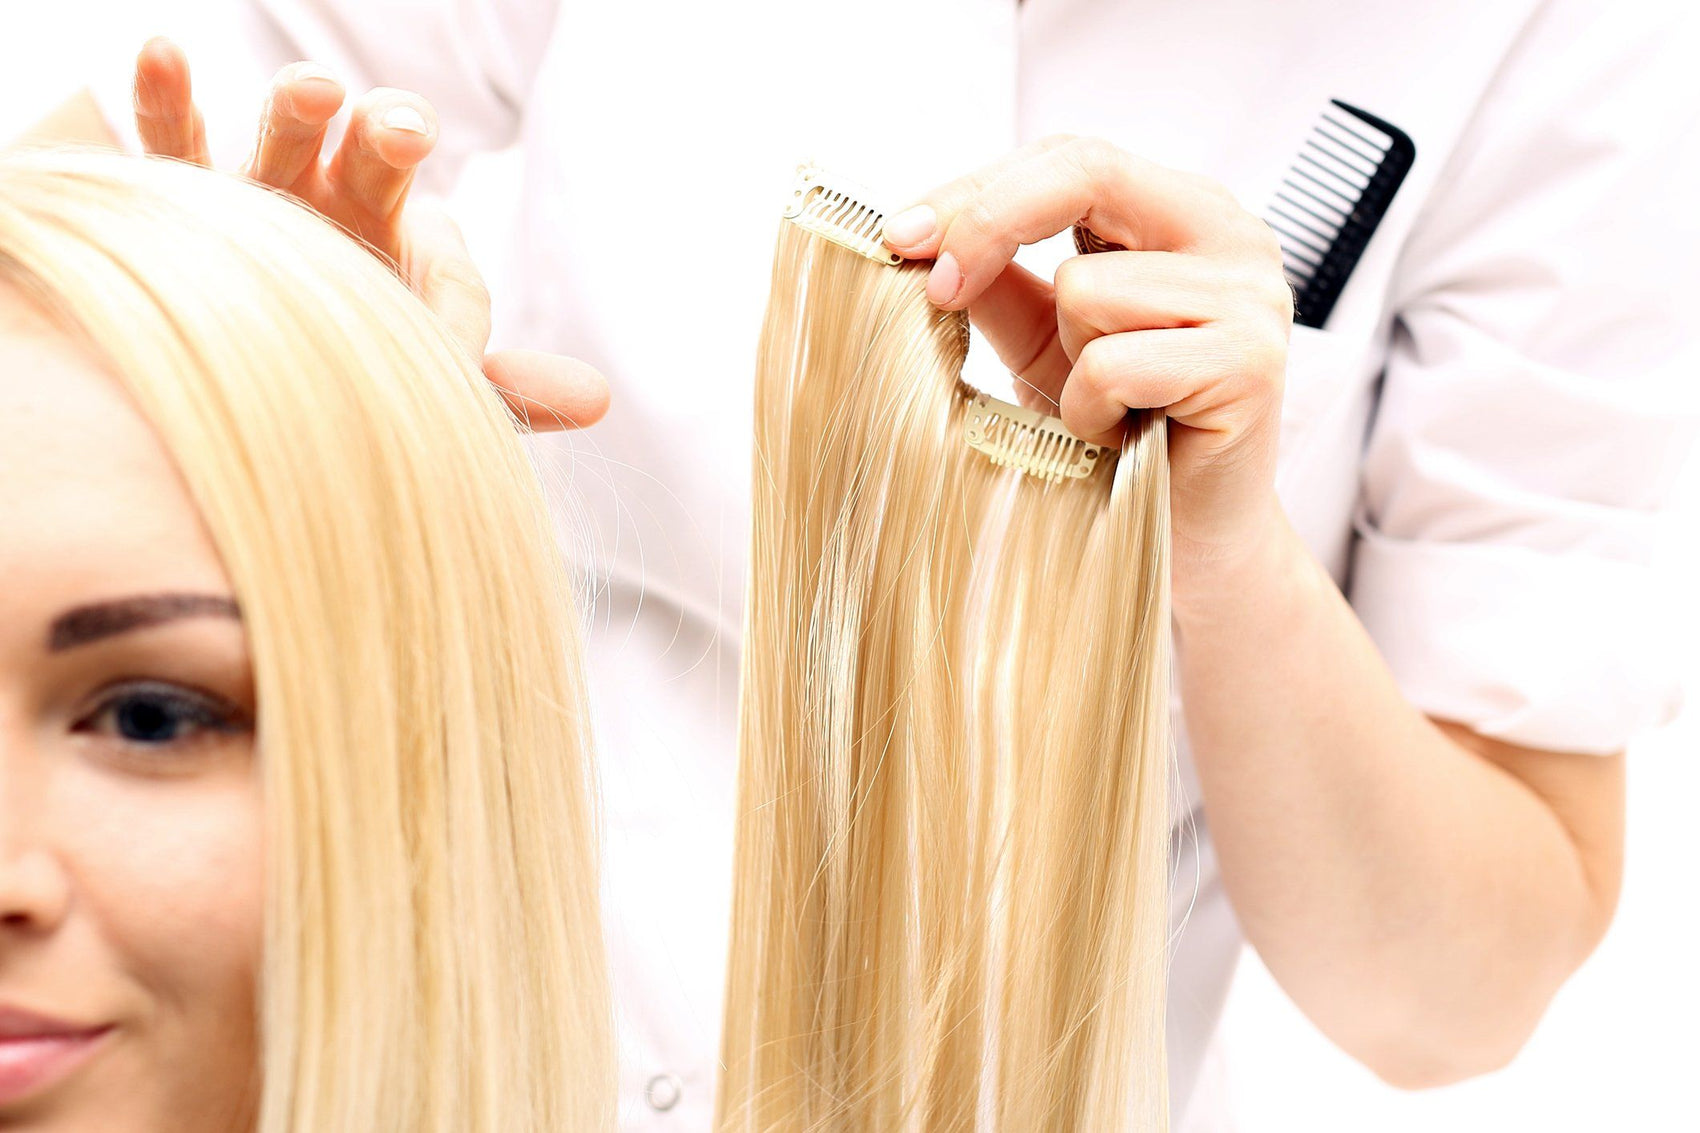 Top tips for caring for your hair extensions - beautyhair.co.uk